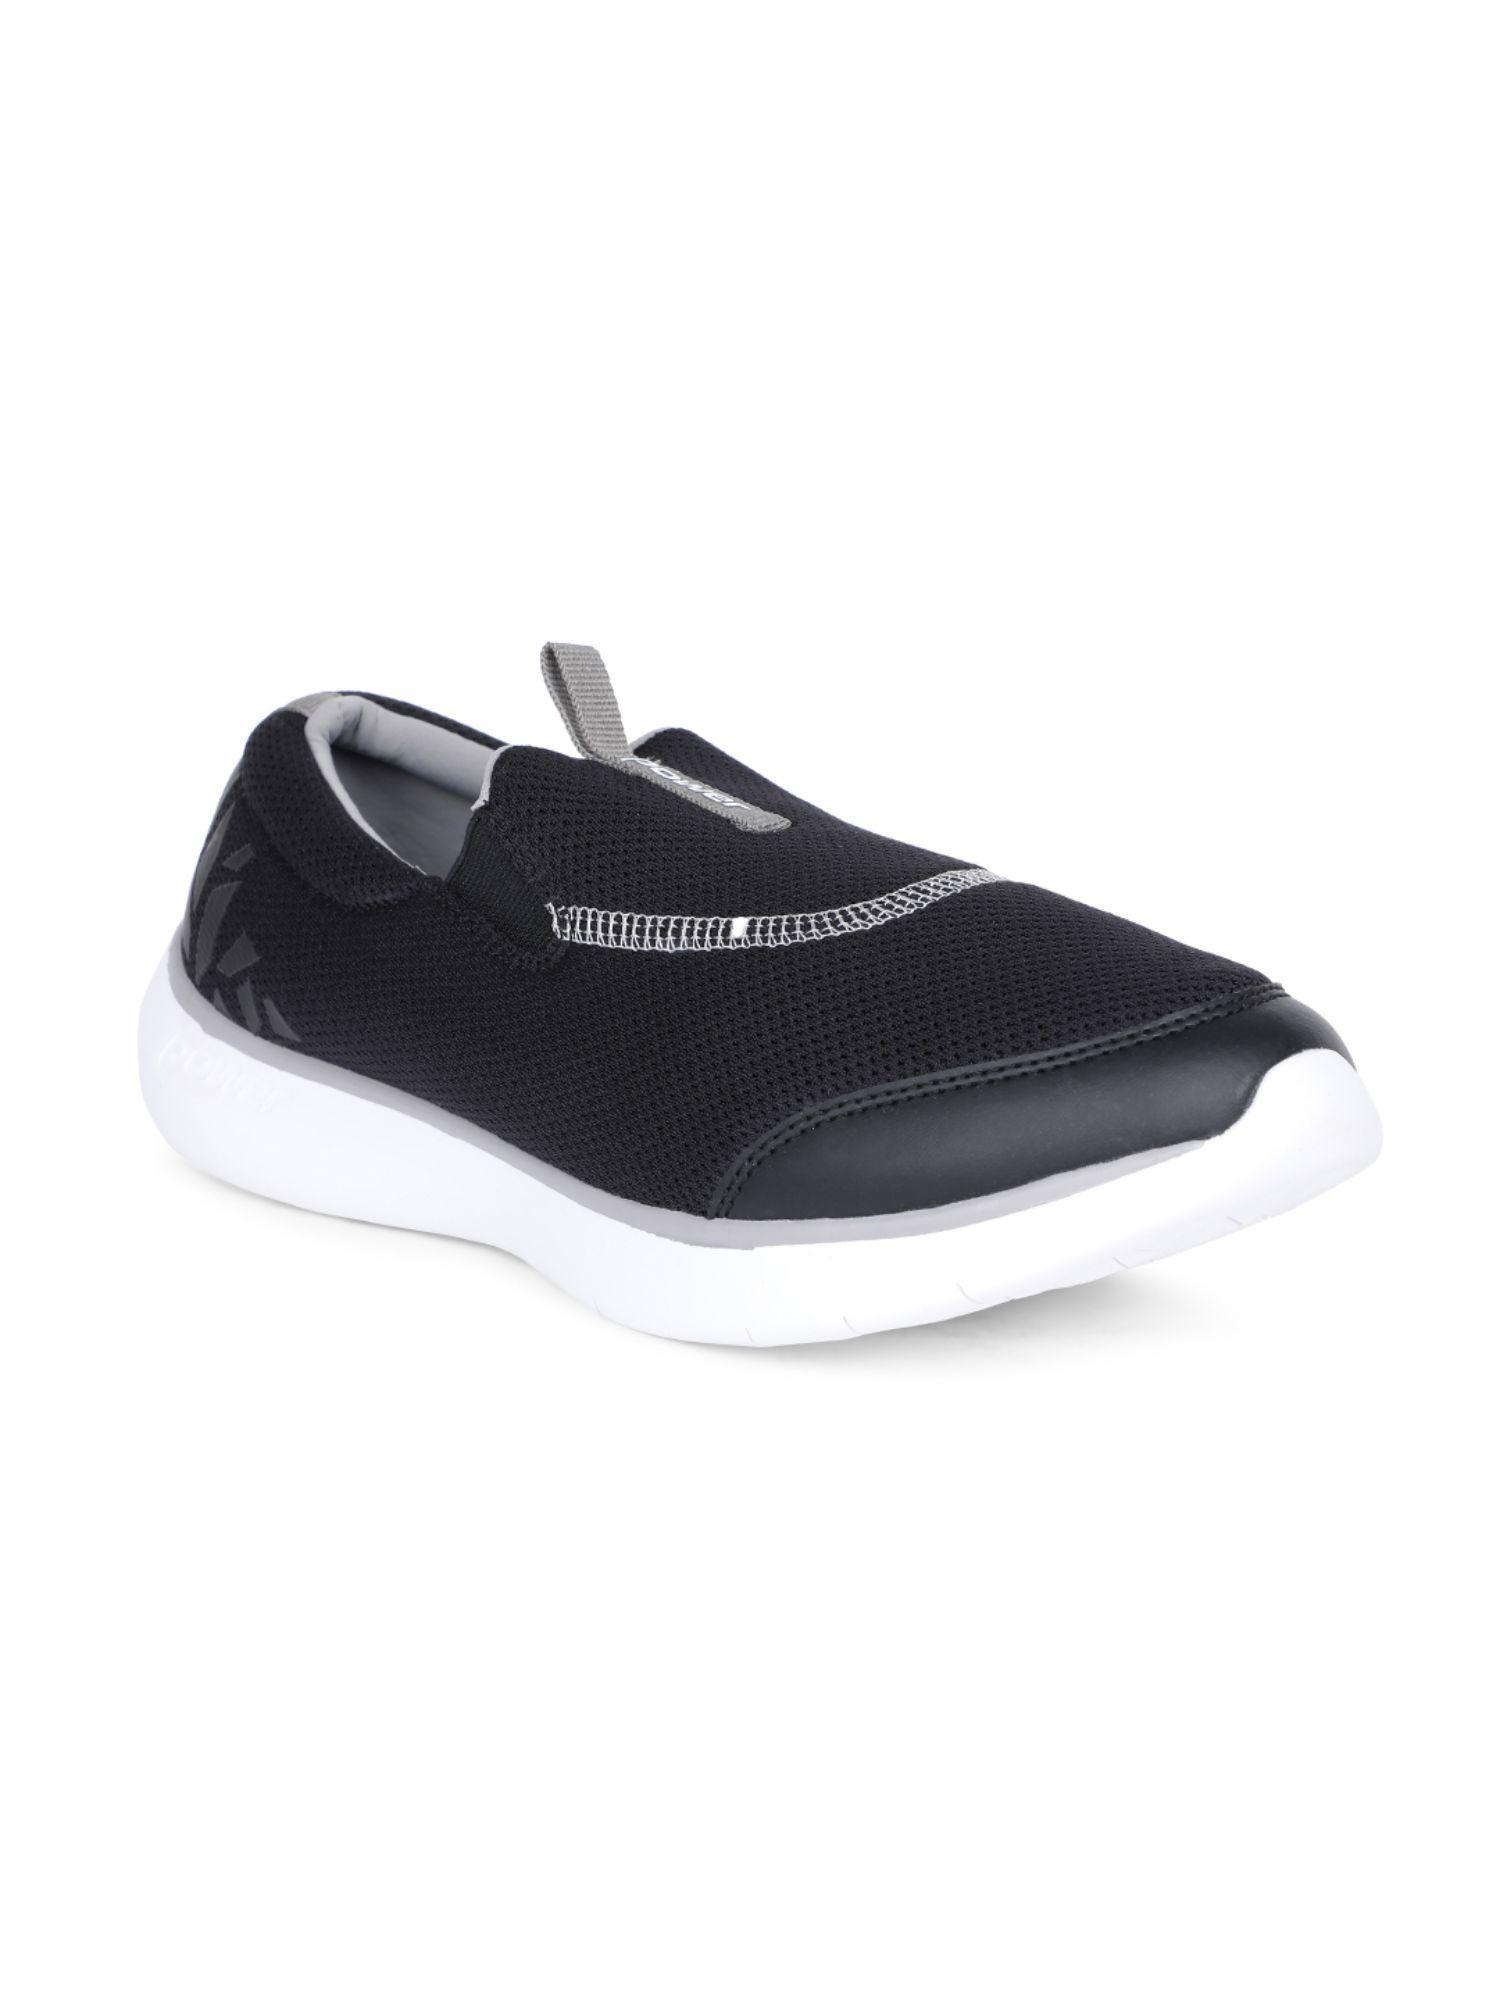 solid black casual shoes